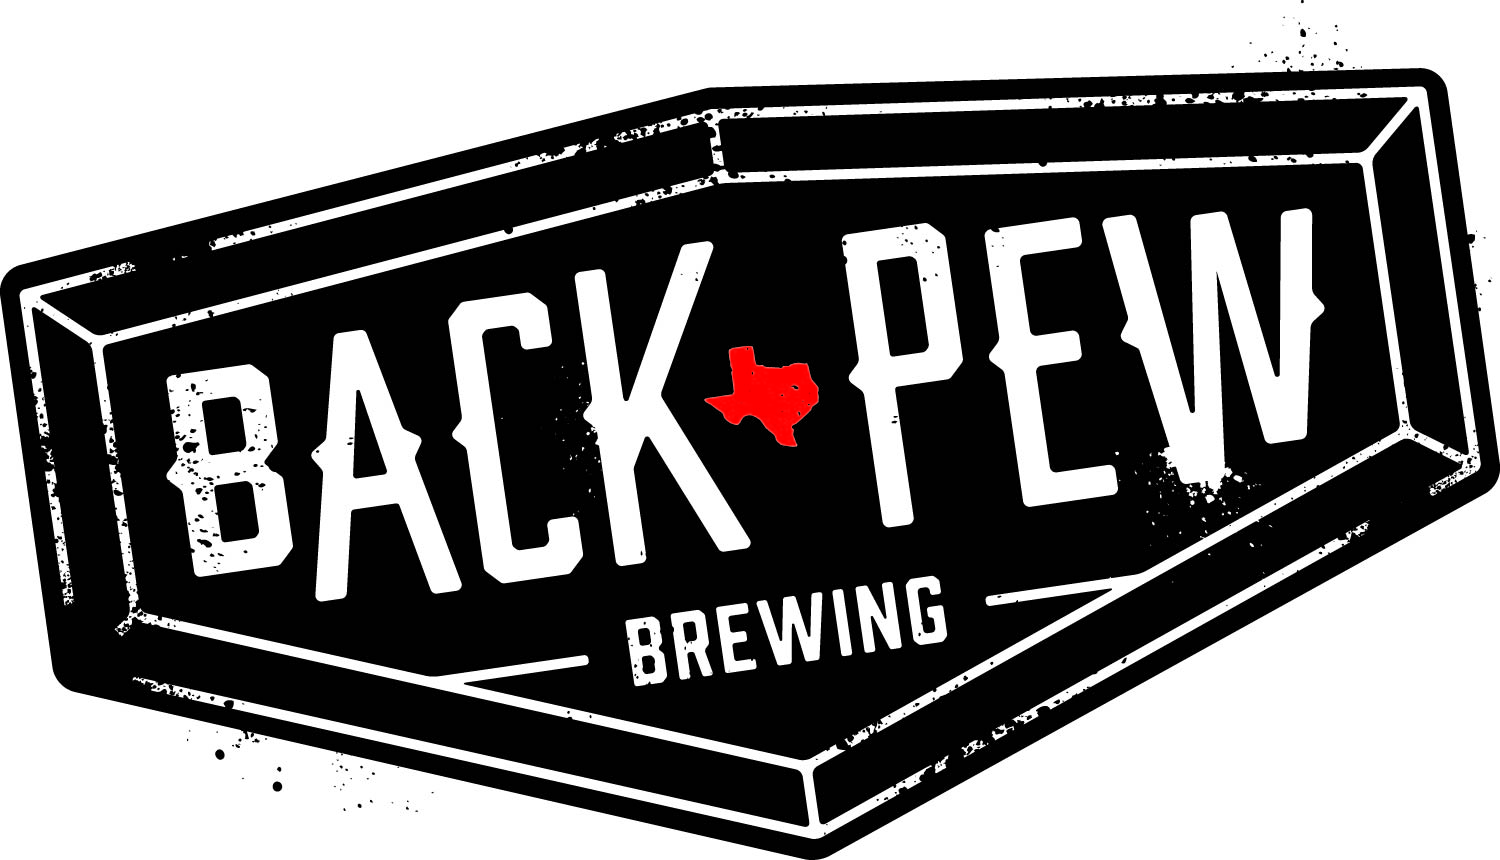 Back Pew Brewing Company